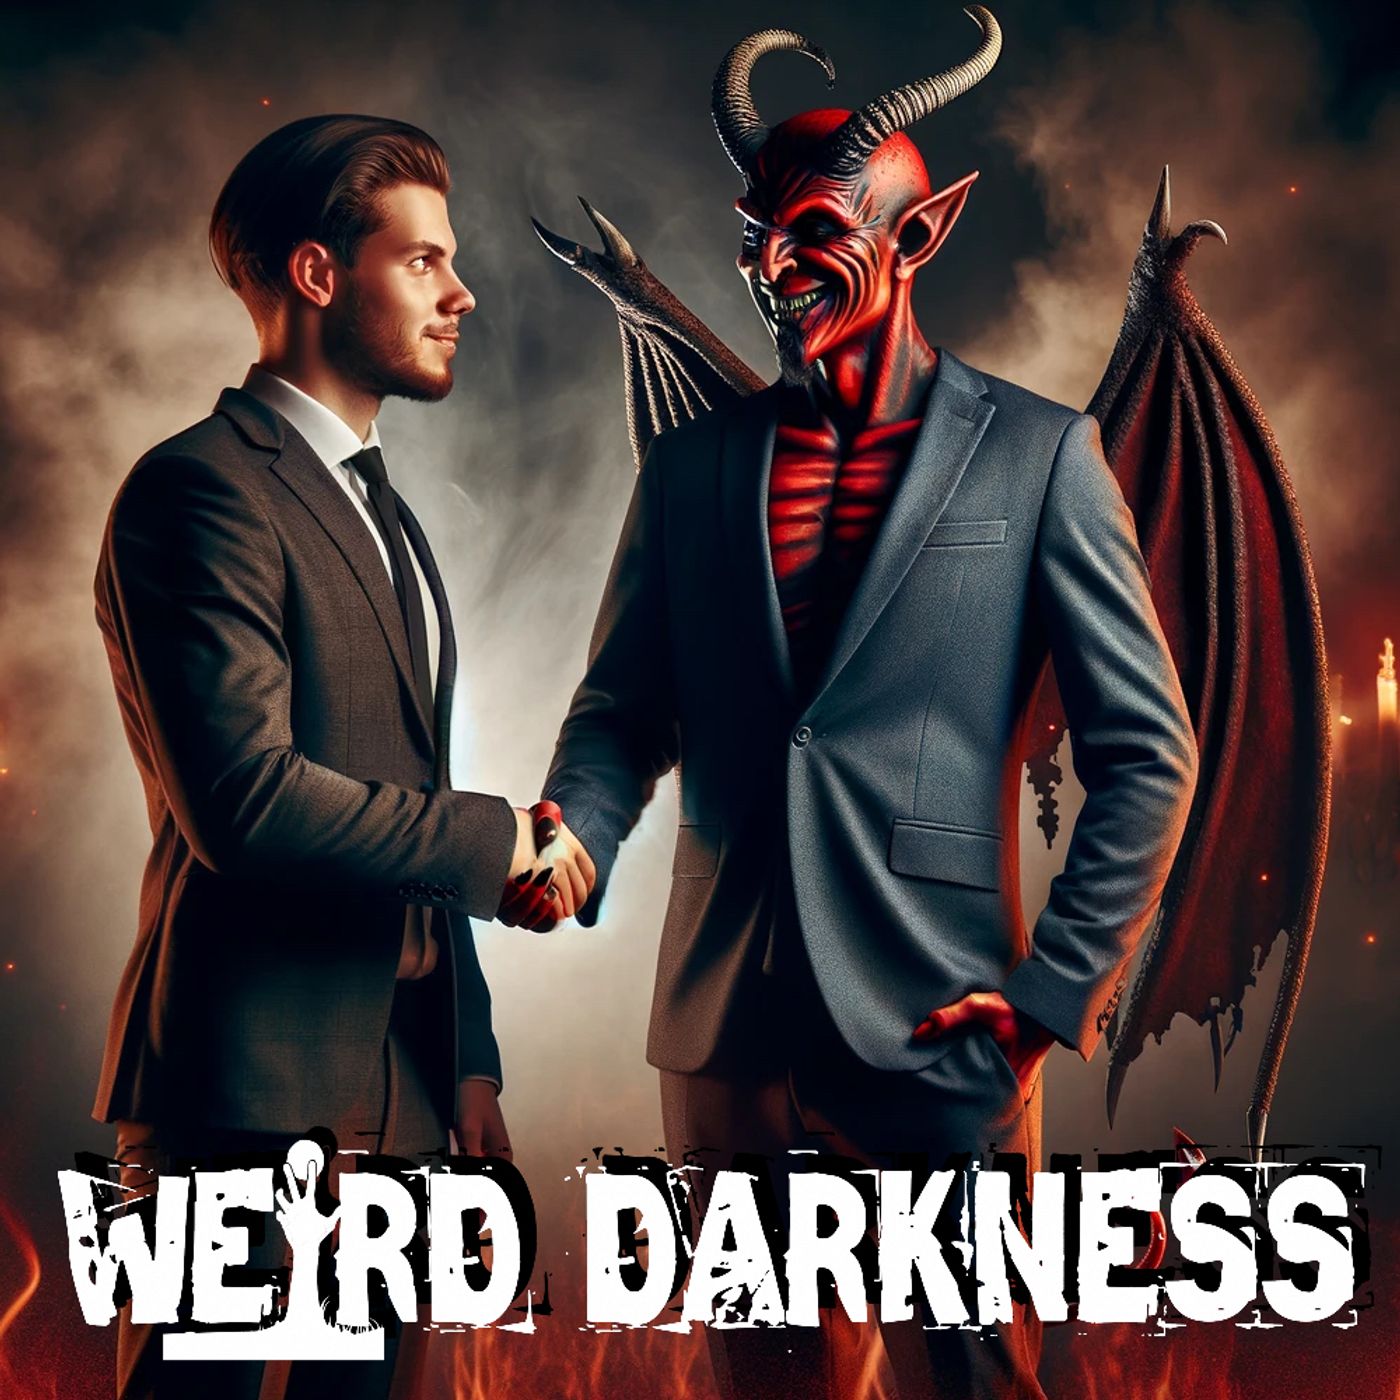 “THEY MADE DEALS WITH THE DEVIL” and More Terrifying True Tales! #WeirdDarkness #Darkives